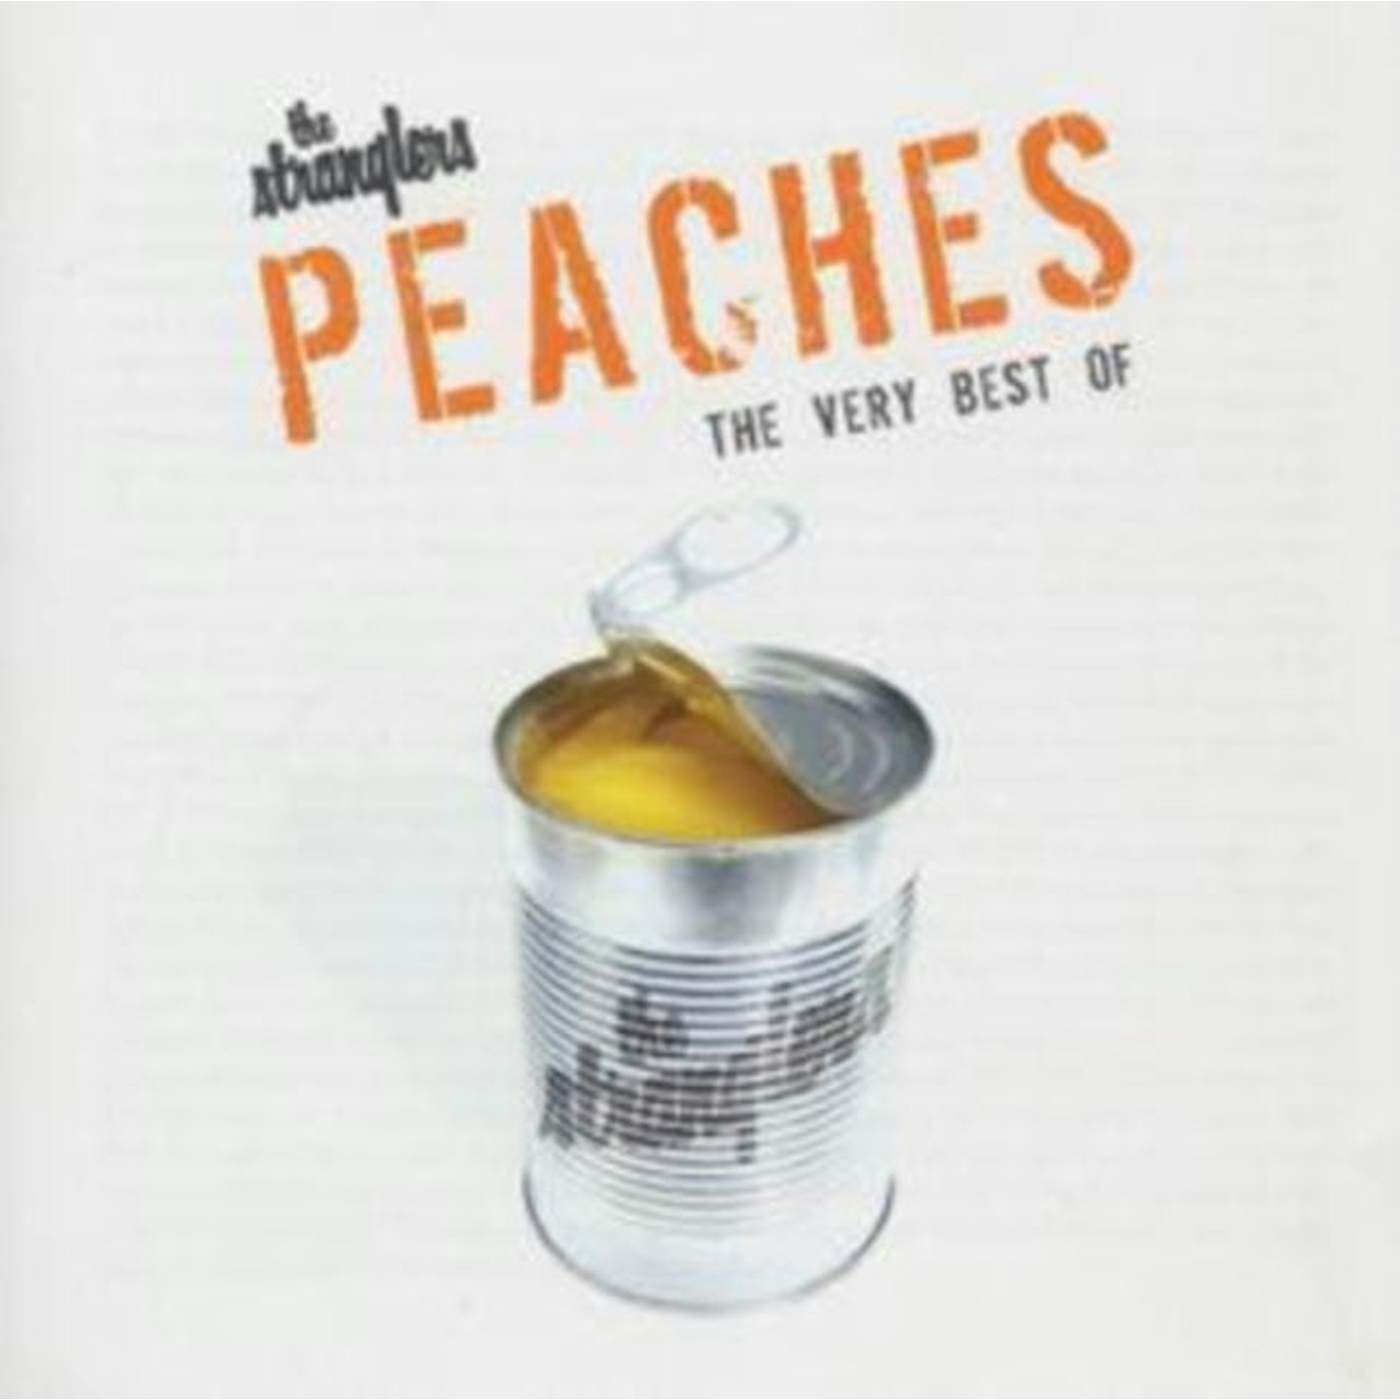 The Stranglers CD - Peaches - The Very Best Of